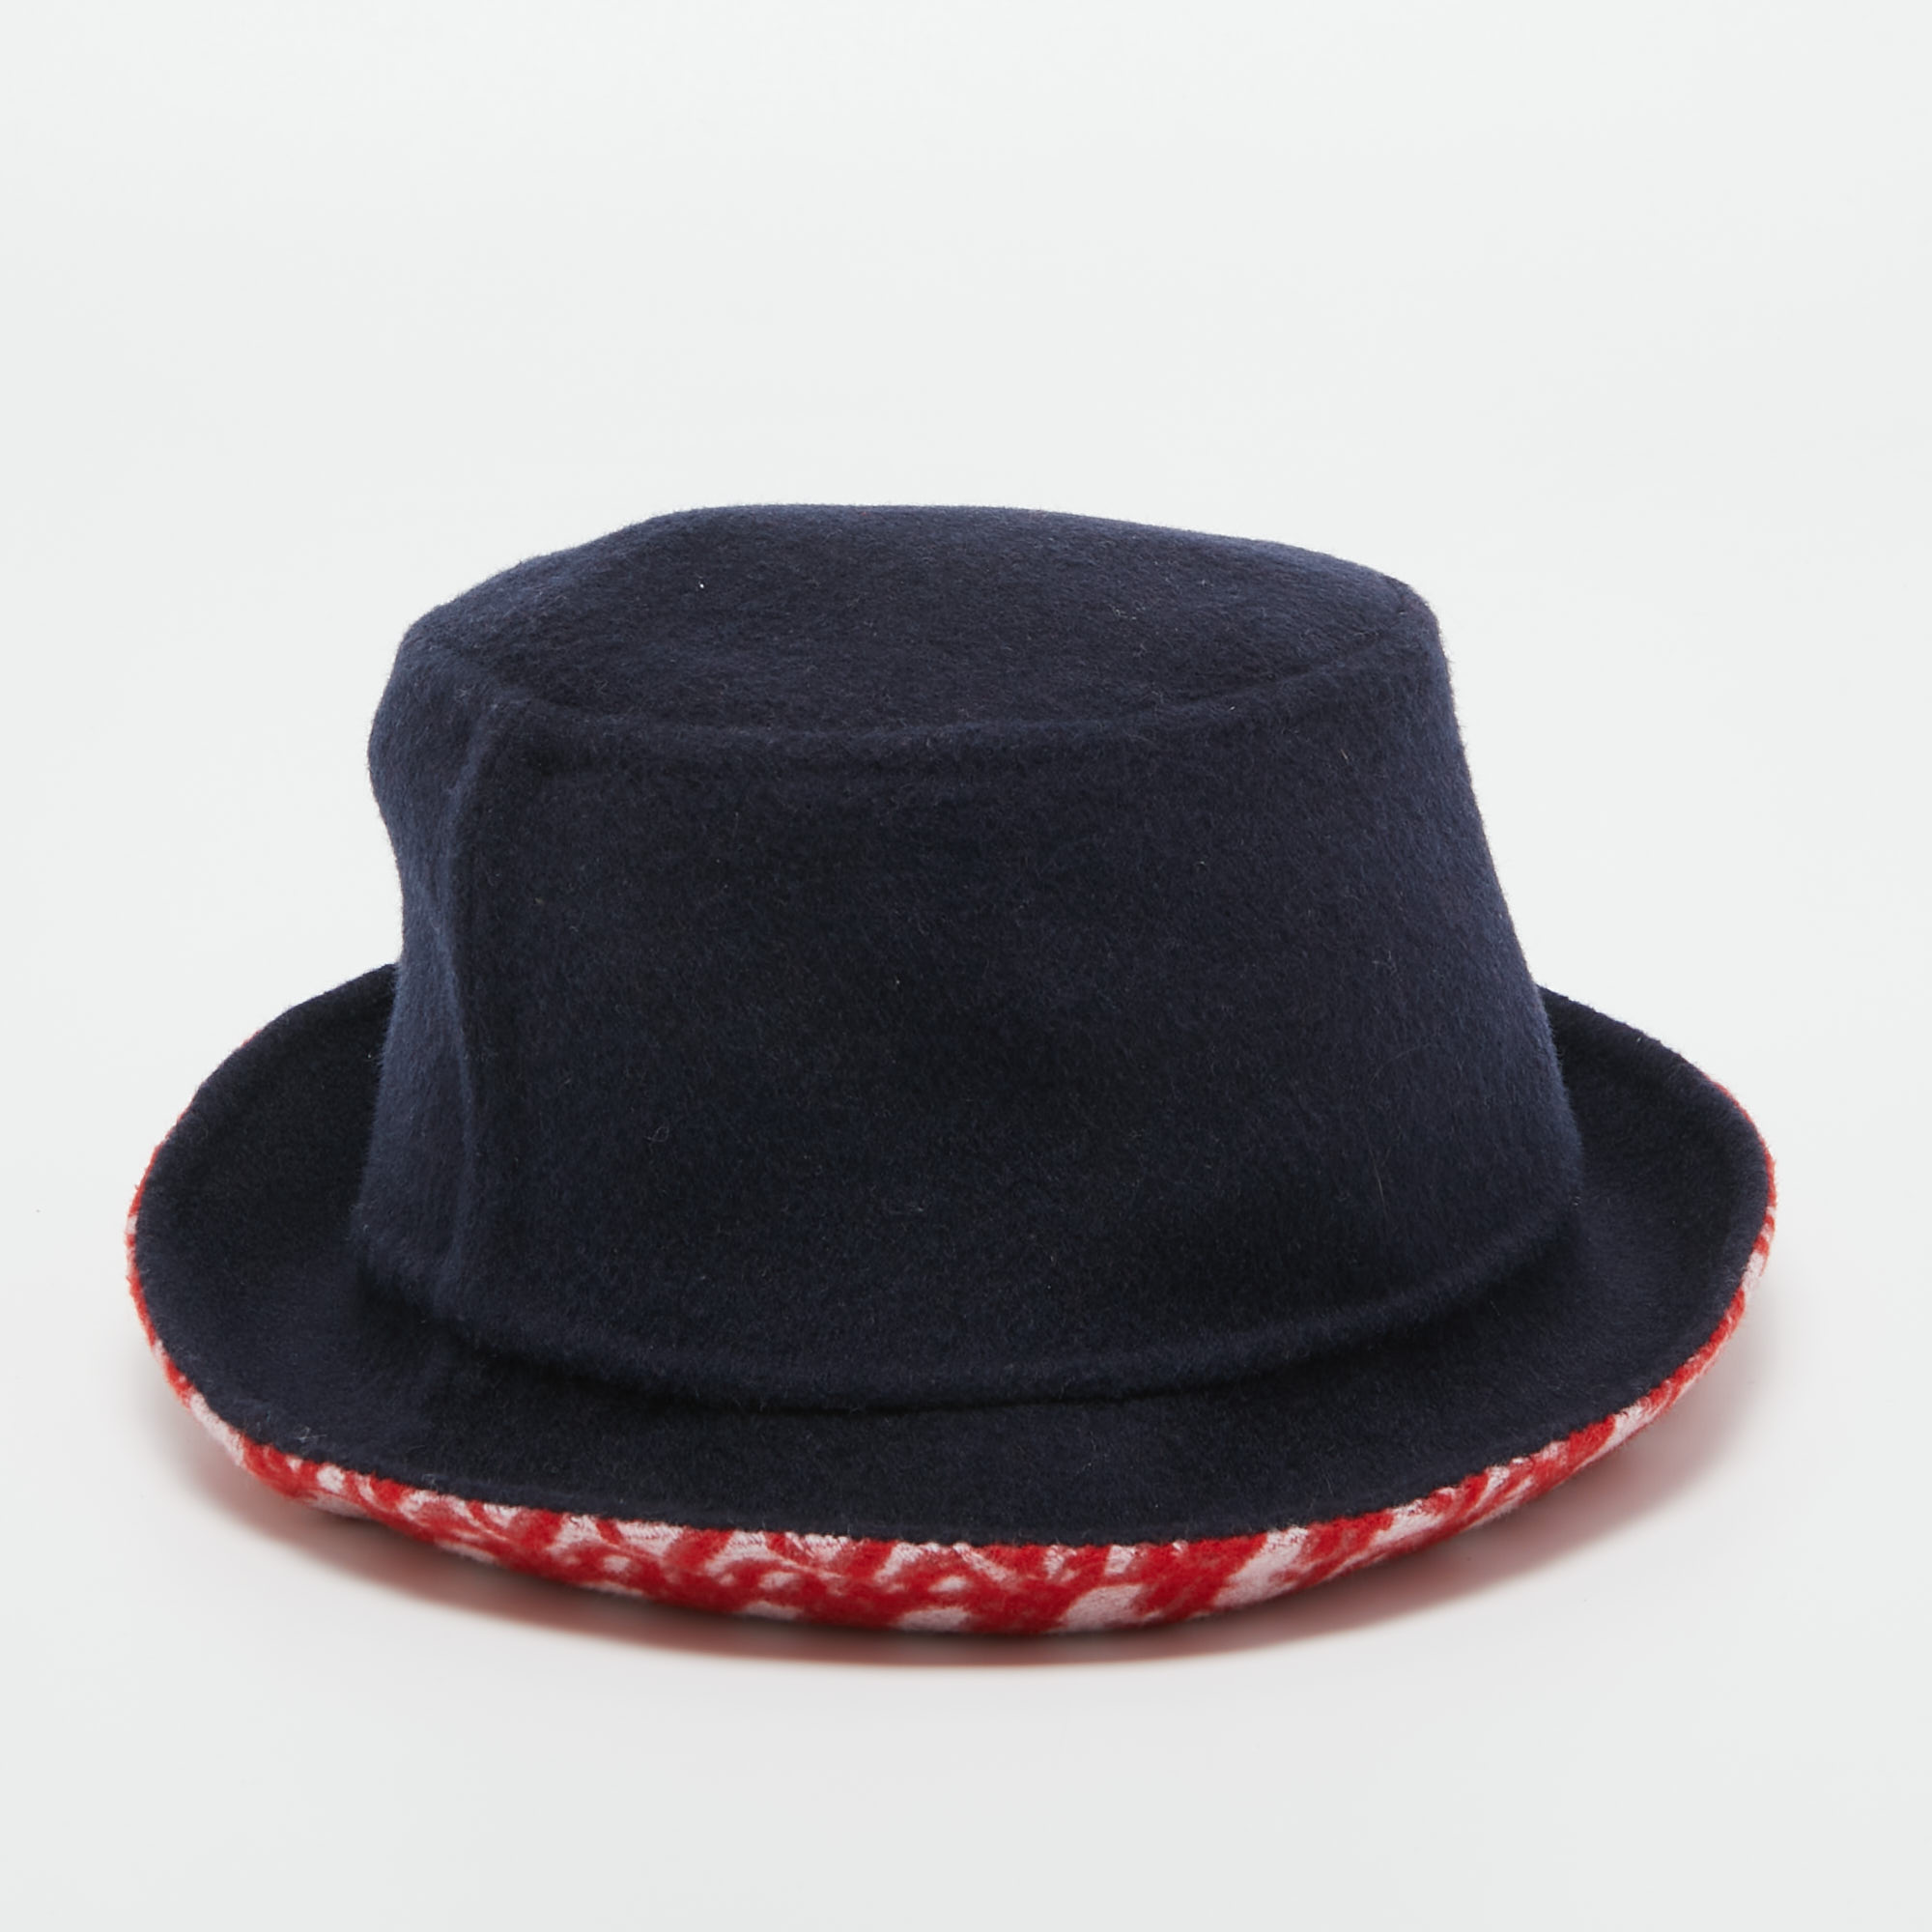 Dior Navy Blue/Red Oblique Wool Reversible Dior Chic Hat Size 57